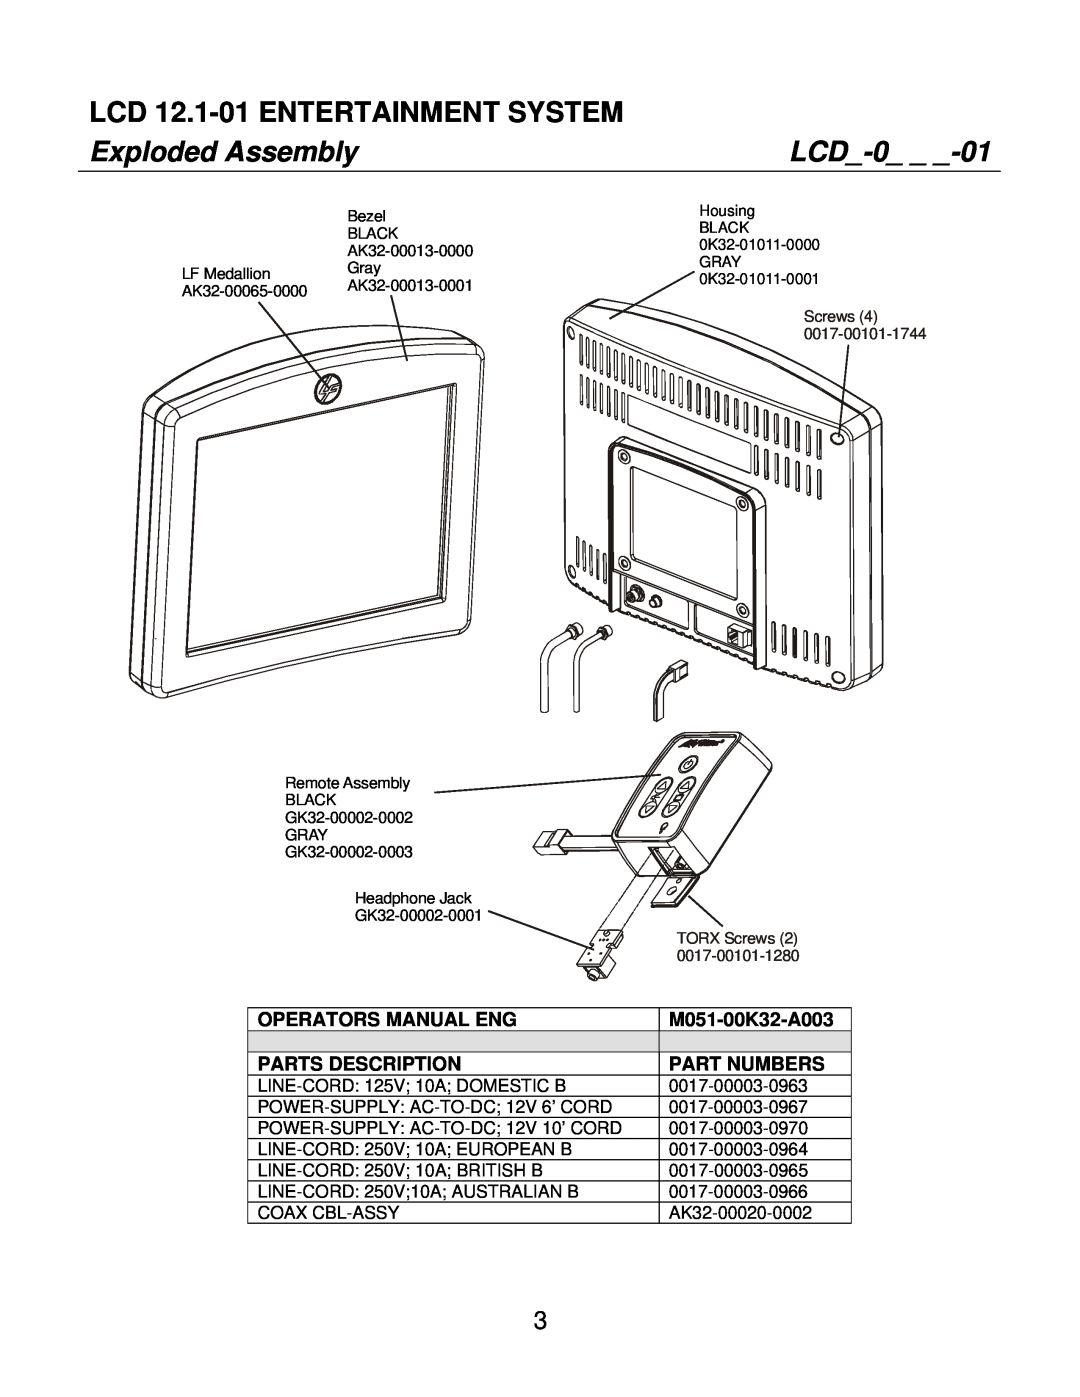 Life Fitness SC85, SC95 LCD 12.1-01 ENTERTAINMENT SYSTEM, Exploded Assembly, LCD-0, Operators Manual Eng, M051-00K32-A003 